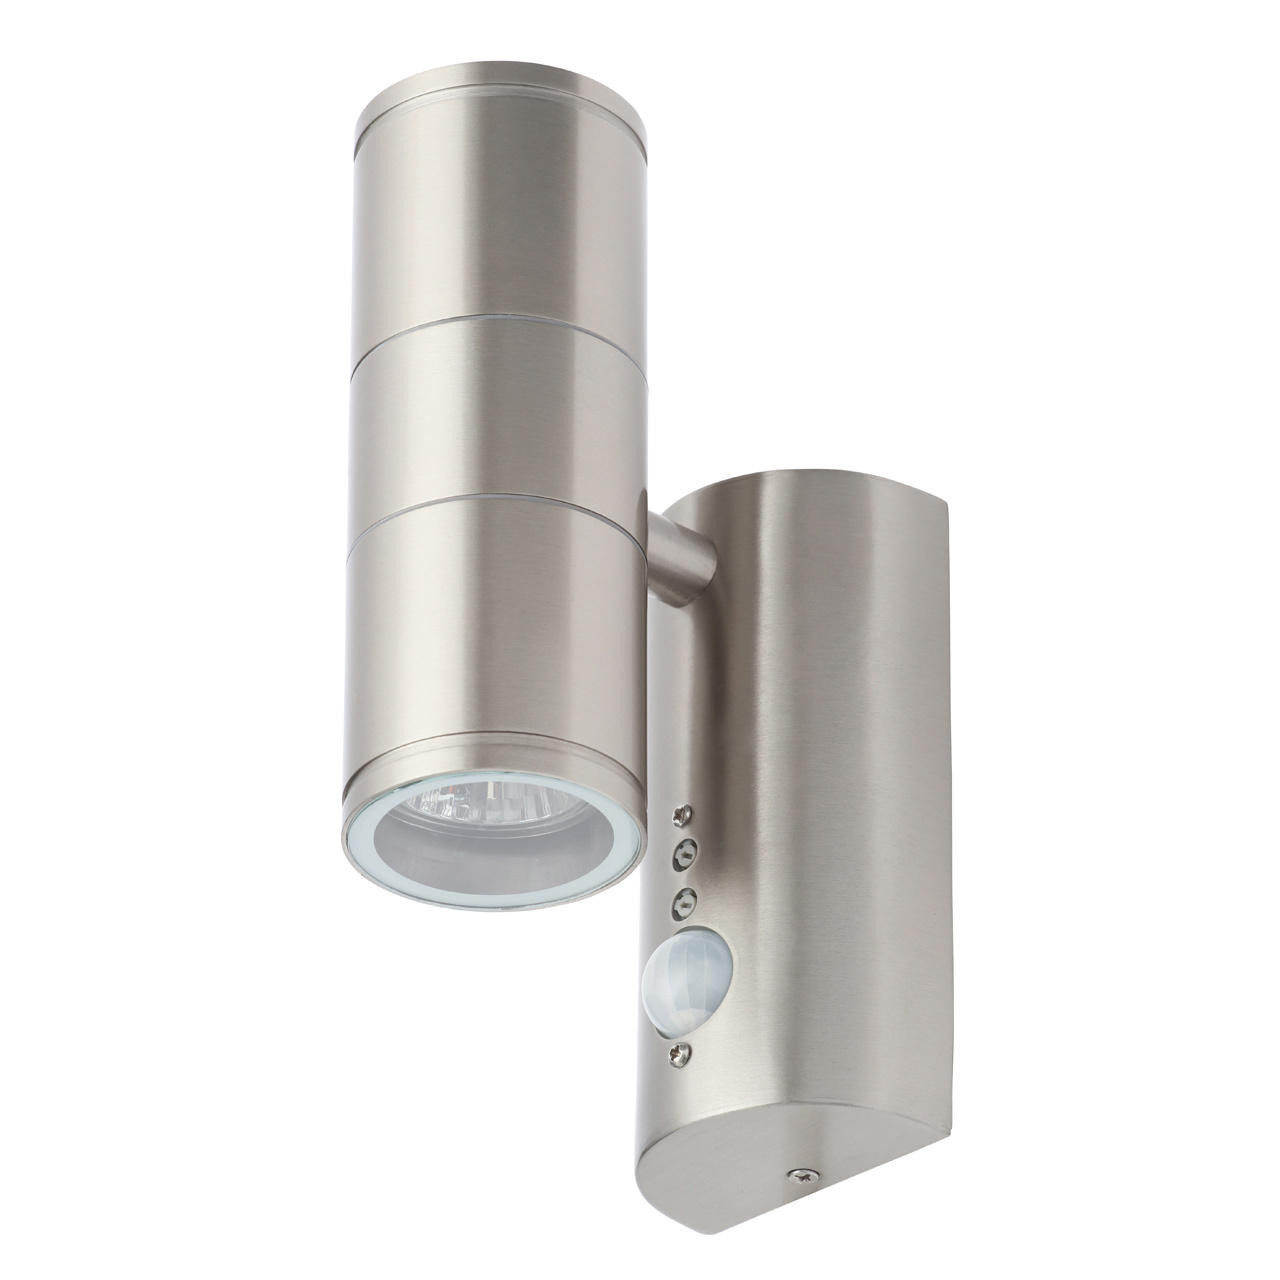 Image of Coast Islay Up and Down Wall Light with PIR Sensor Stainless Steel